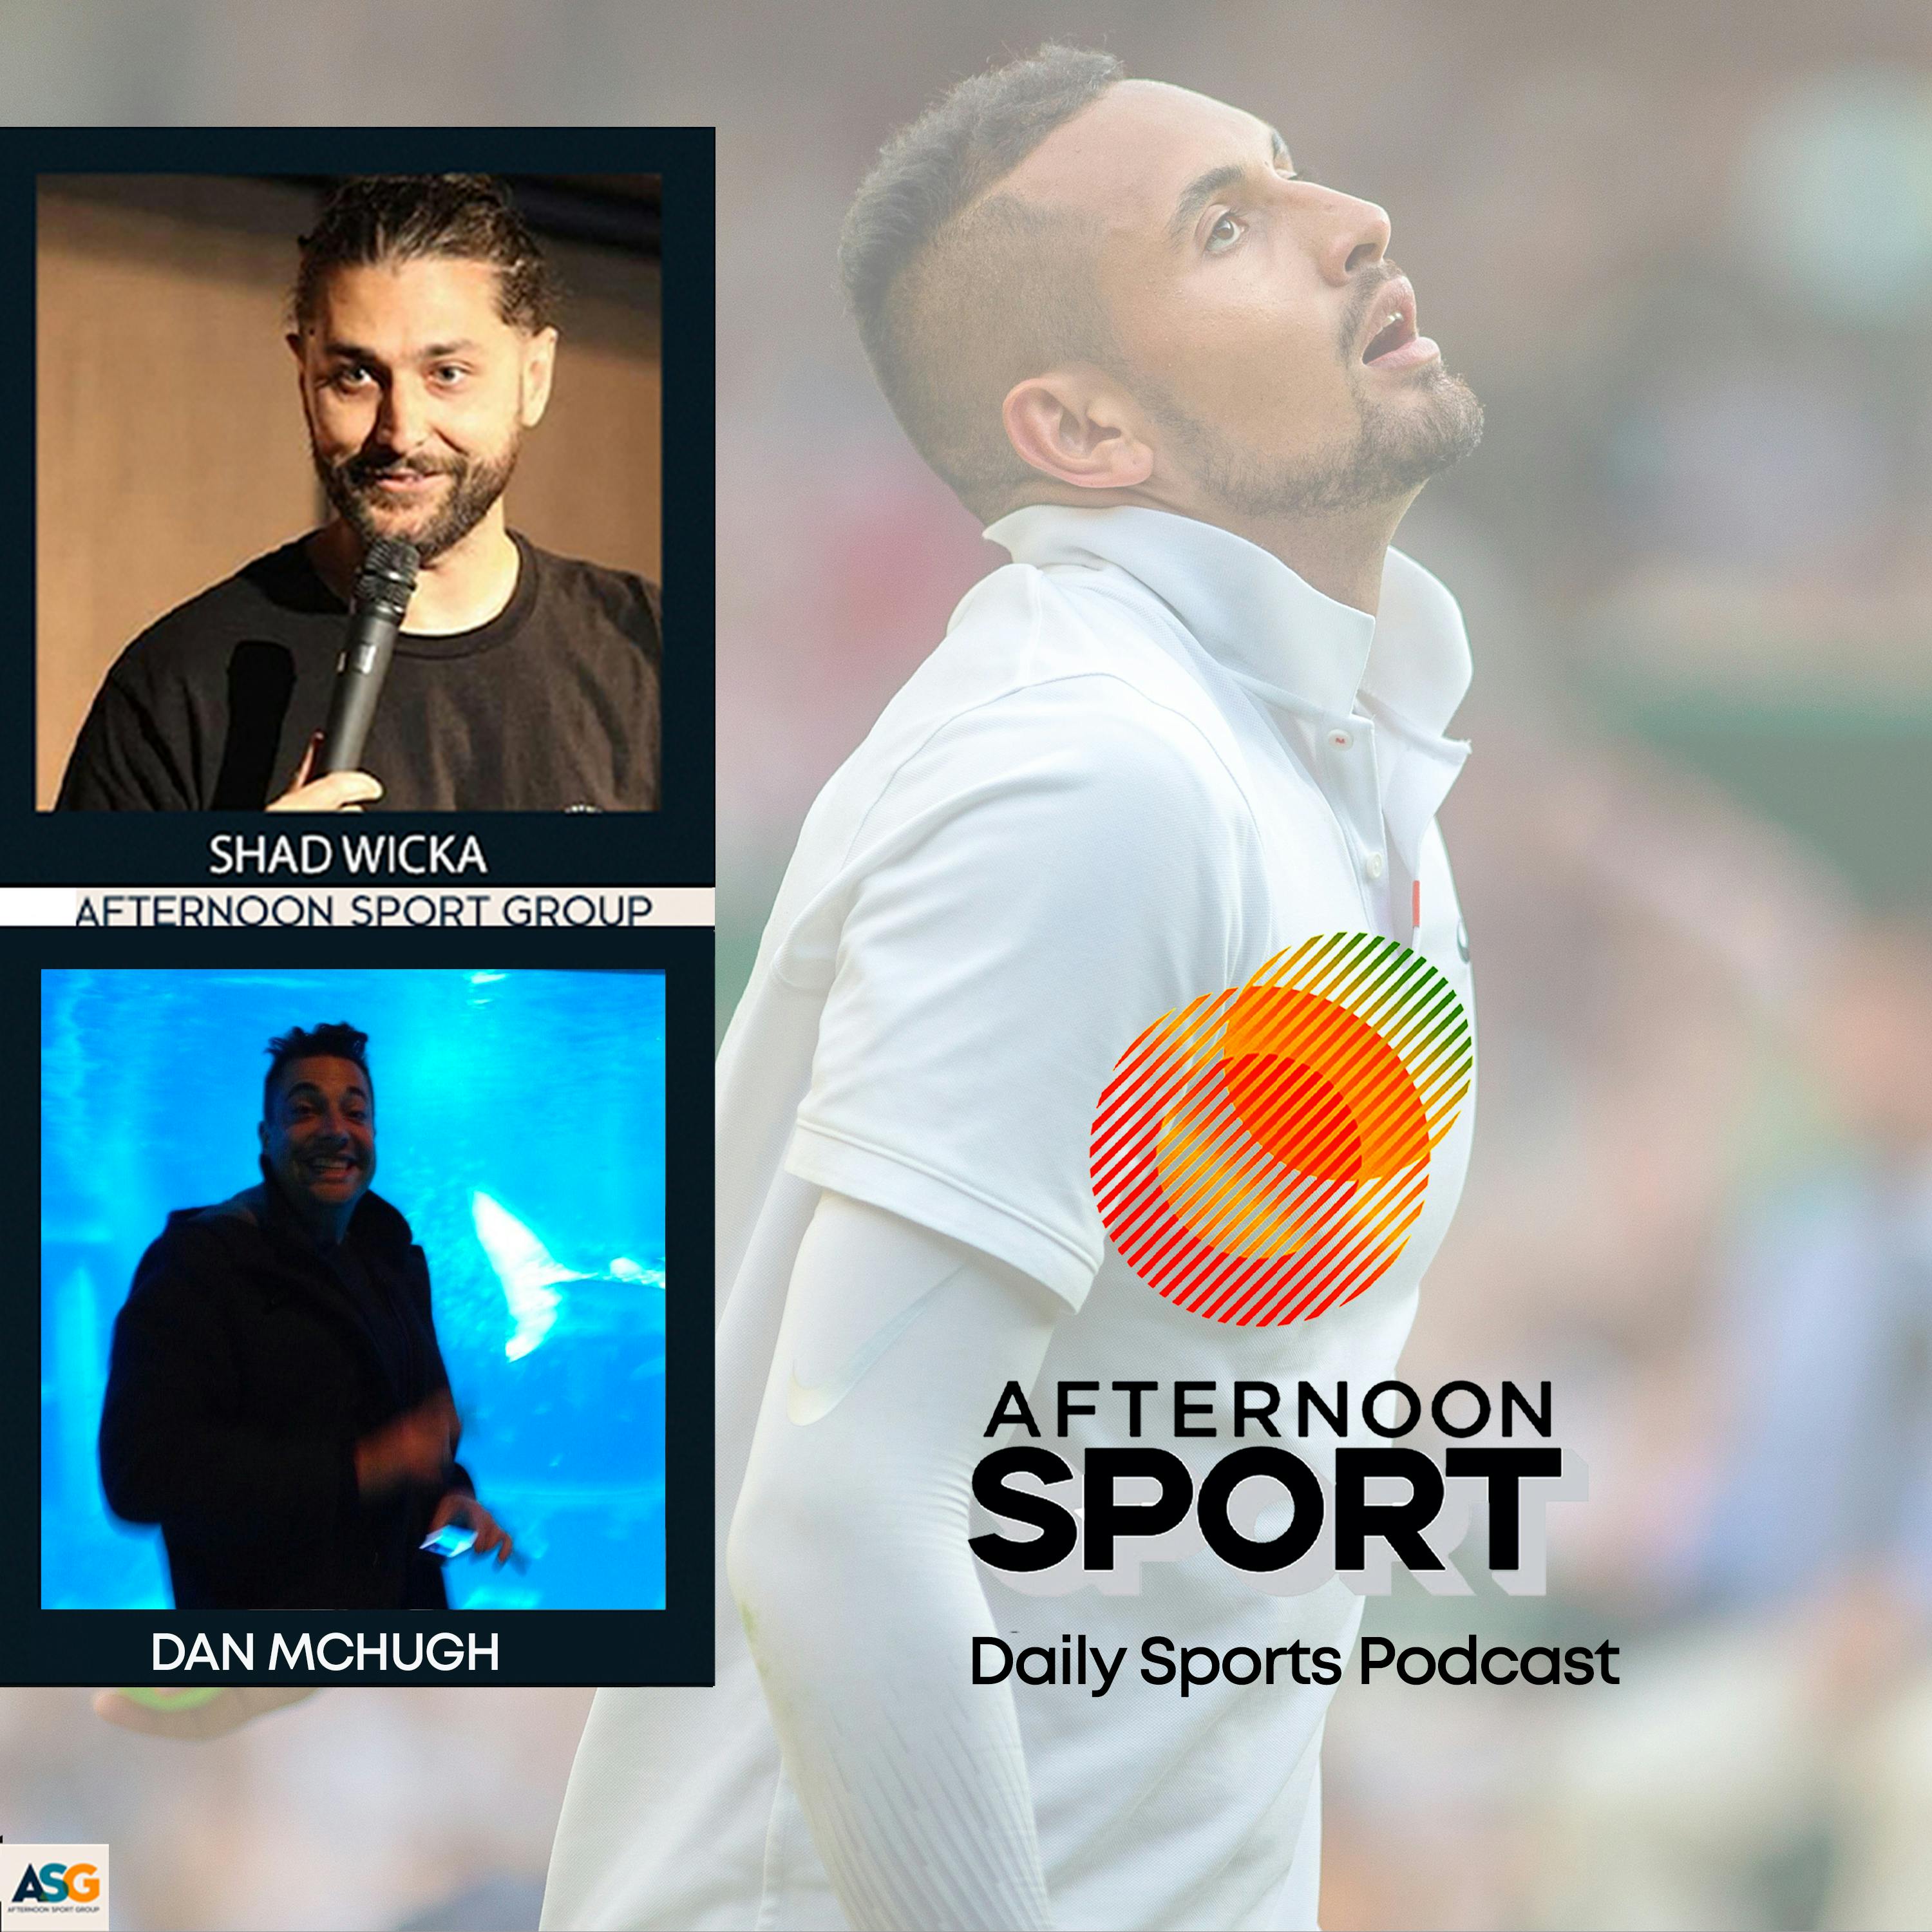 15th June Shad Wicka and Dan McHugh: to win the Ashes in England, Nick Kyrgios loses comeback match, Oakland A’s reverse boycott, AFL Concussion cases merge, State of Origin + more!